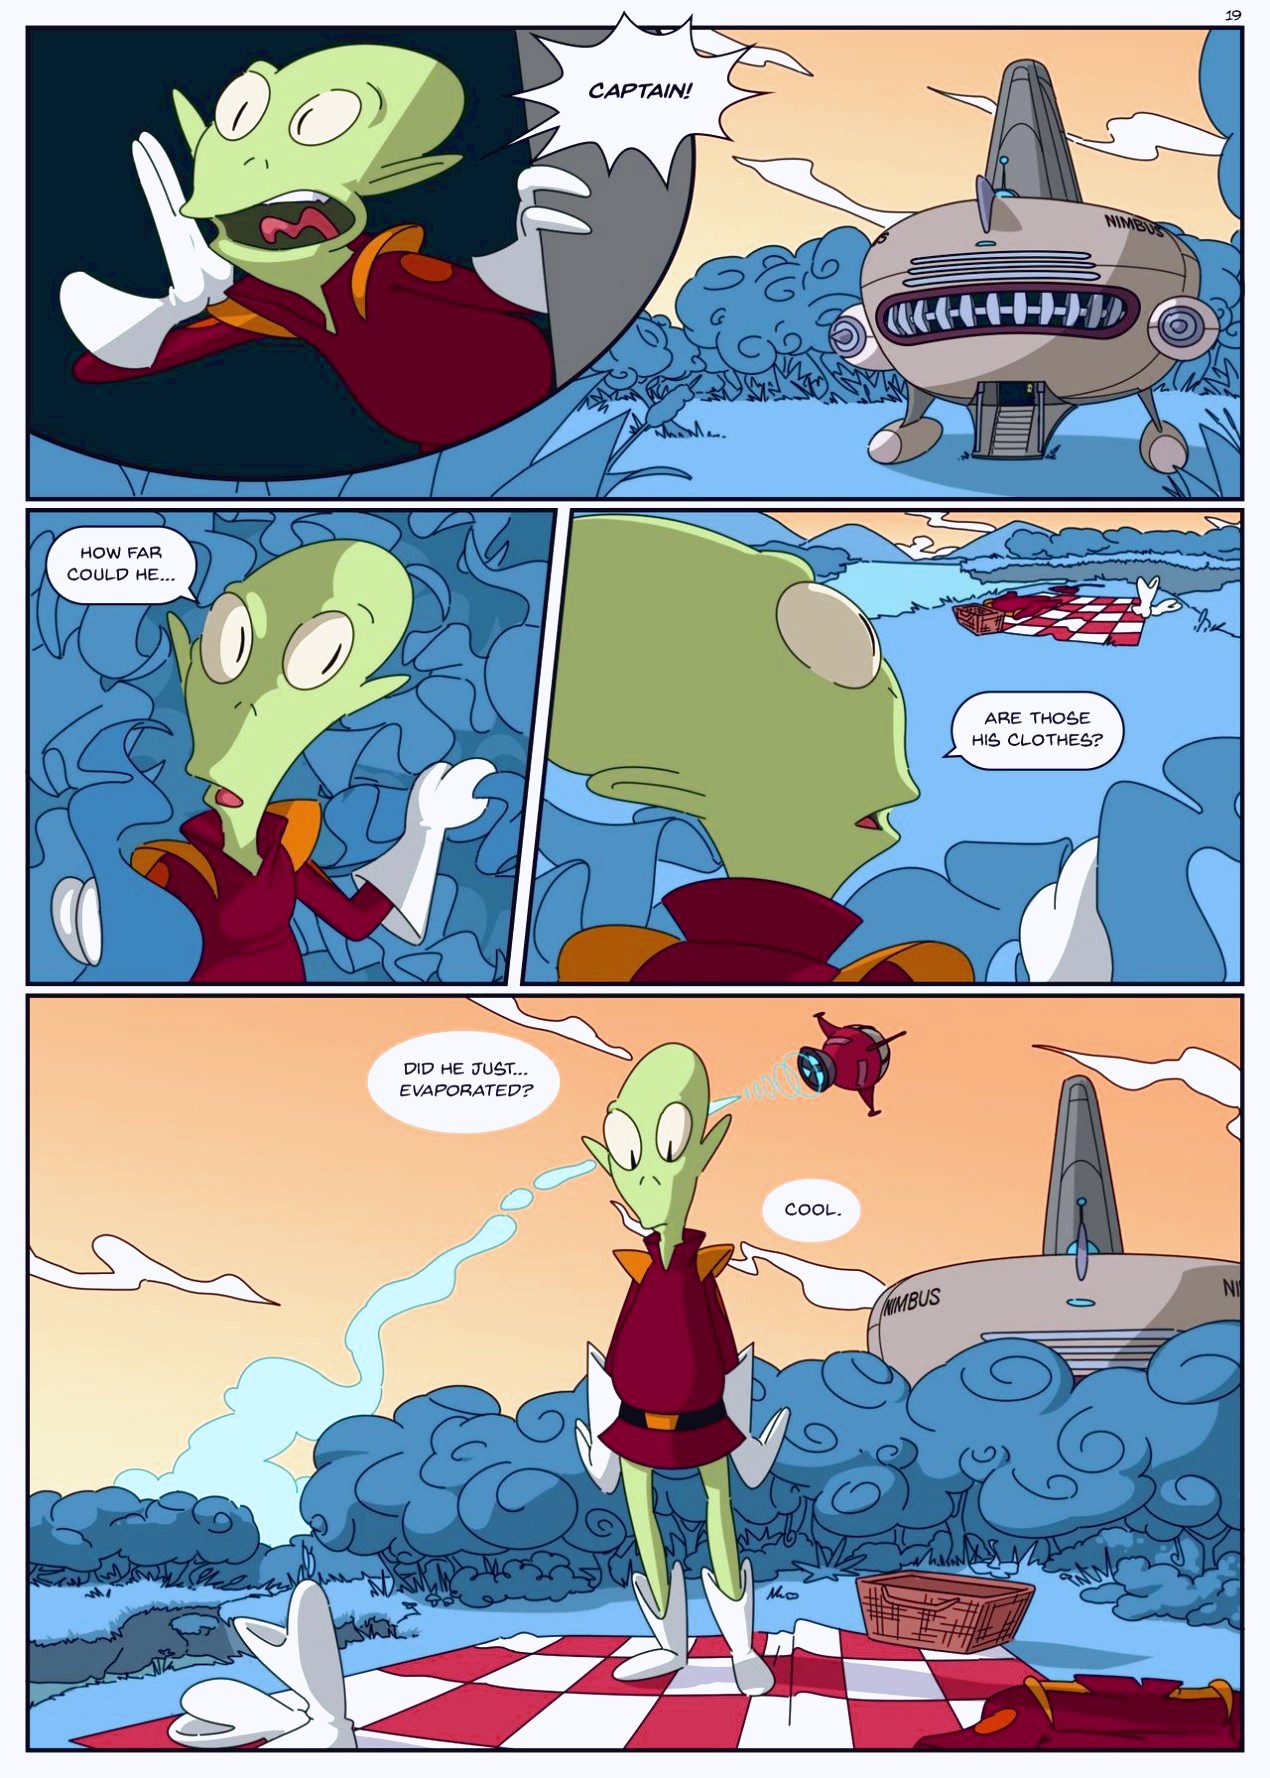 Zapp Brannigan & The Misterious Omicronian page 20